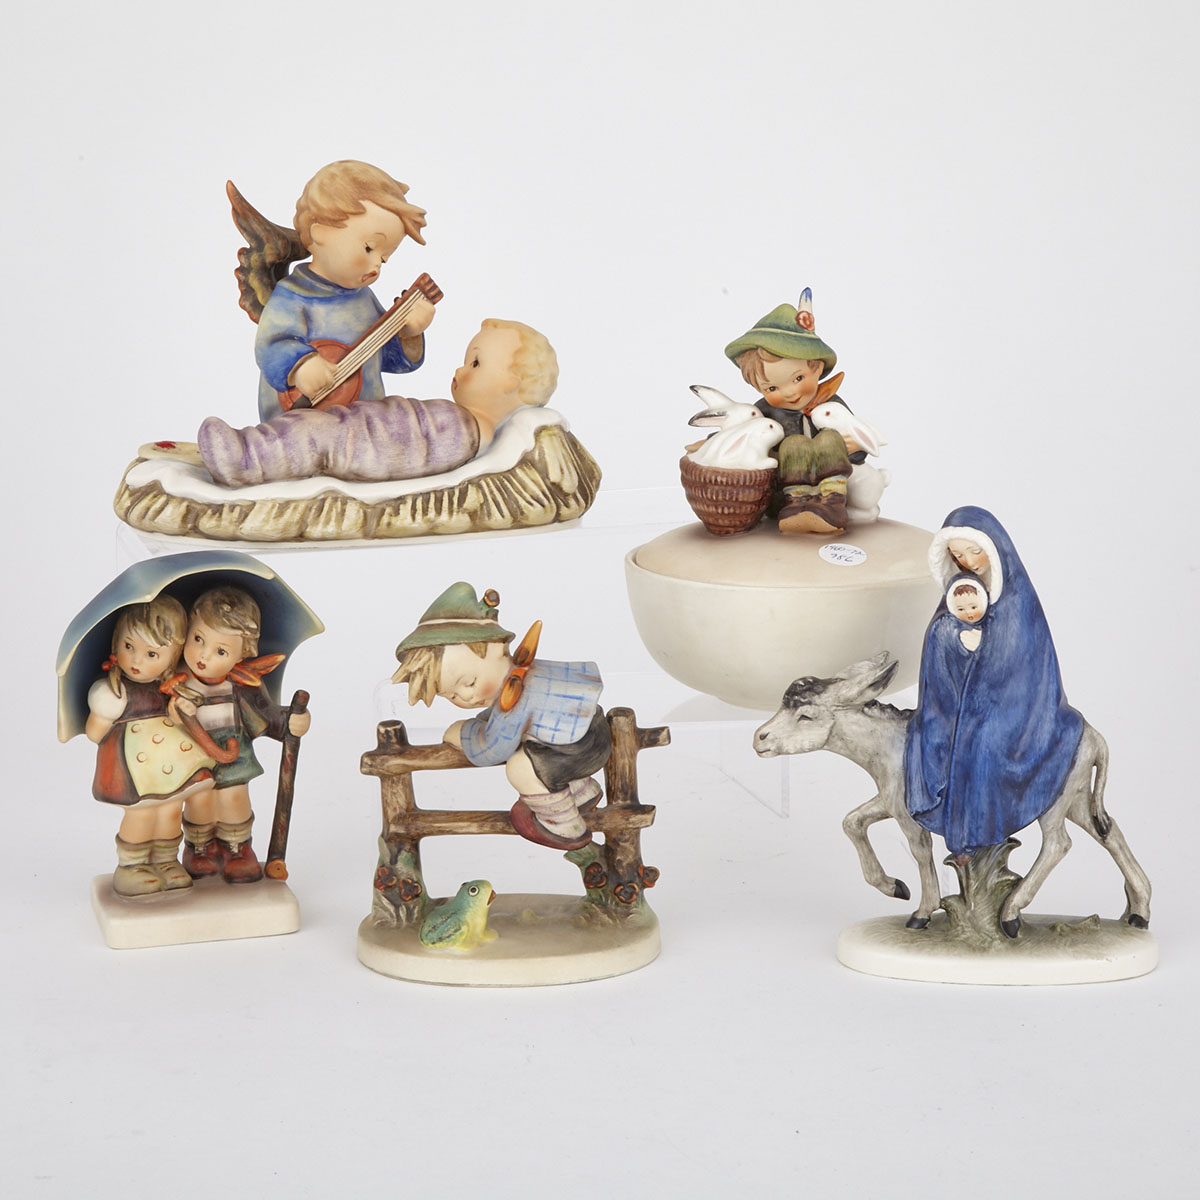 Group of Five Hummel Figures, 20th Century